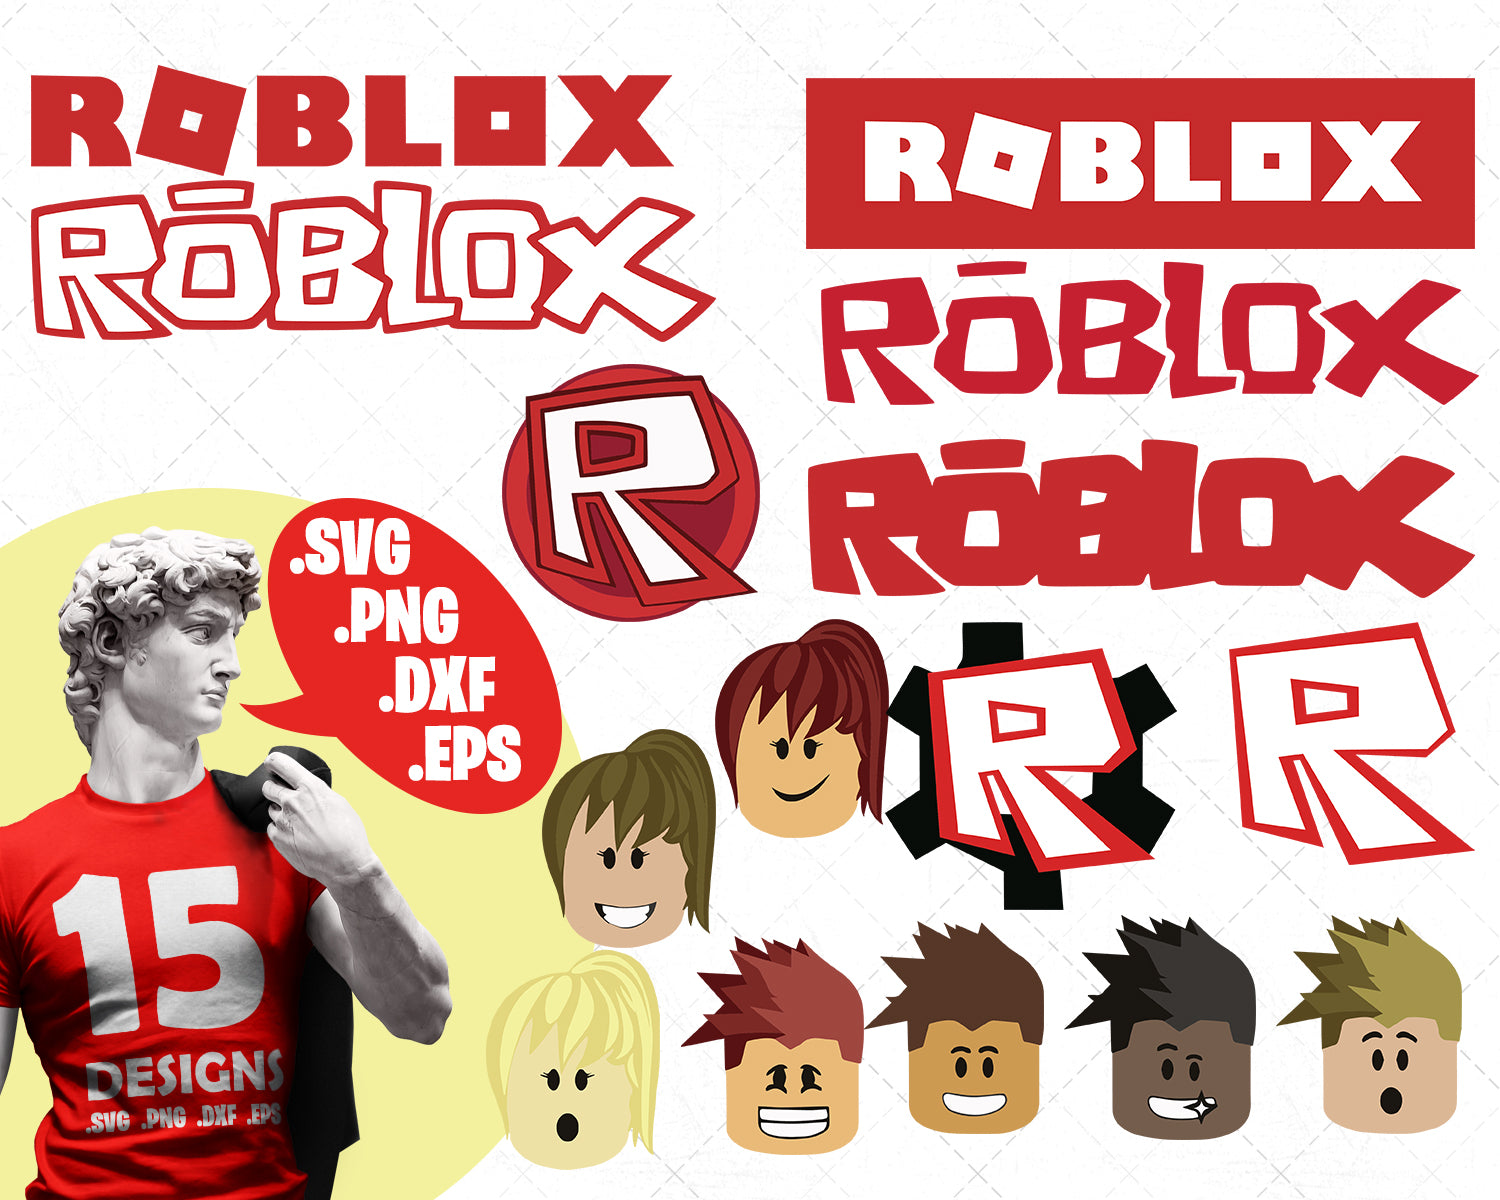 Roblox Svg Roblox Alphabet Svg Roblox Font Svg Roblox Letter Roblo Svg Designs For Cutting And Printing - font roblox text